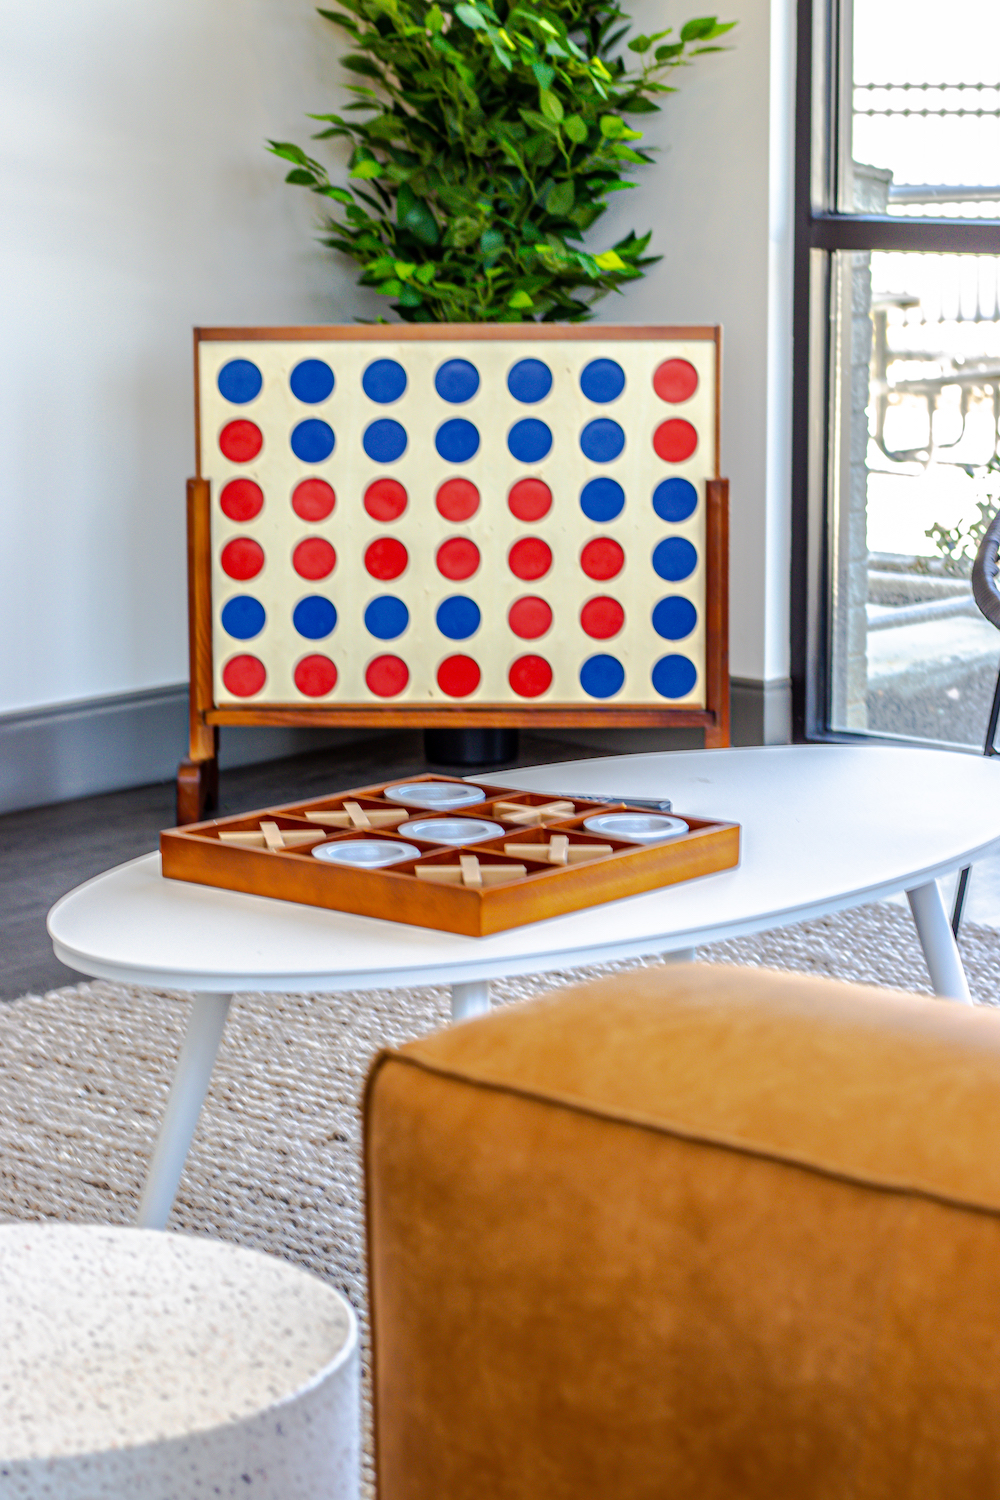 connect four set in community area